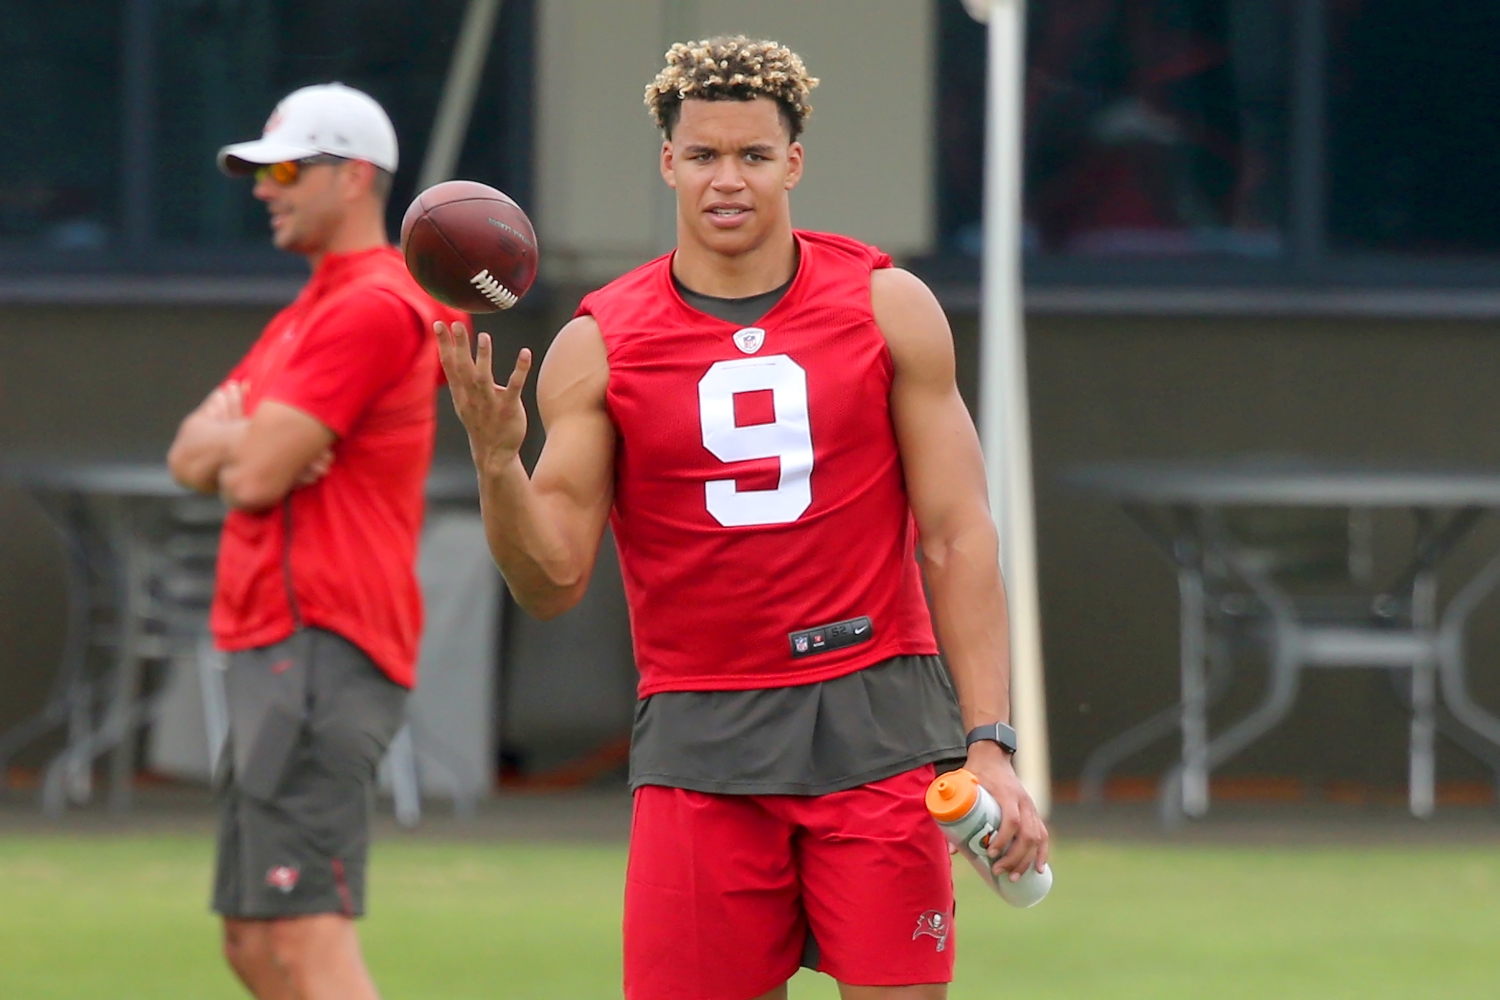 Buccaneers first-round pick Joe Tryon balances a football on his finger during practice.